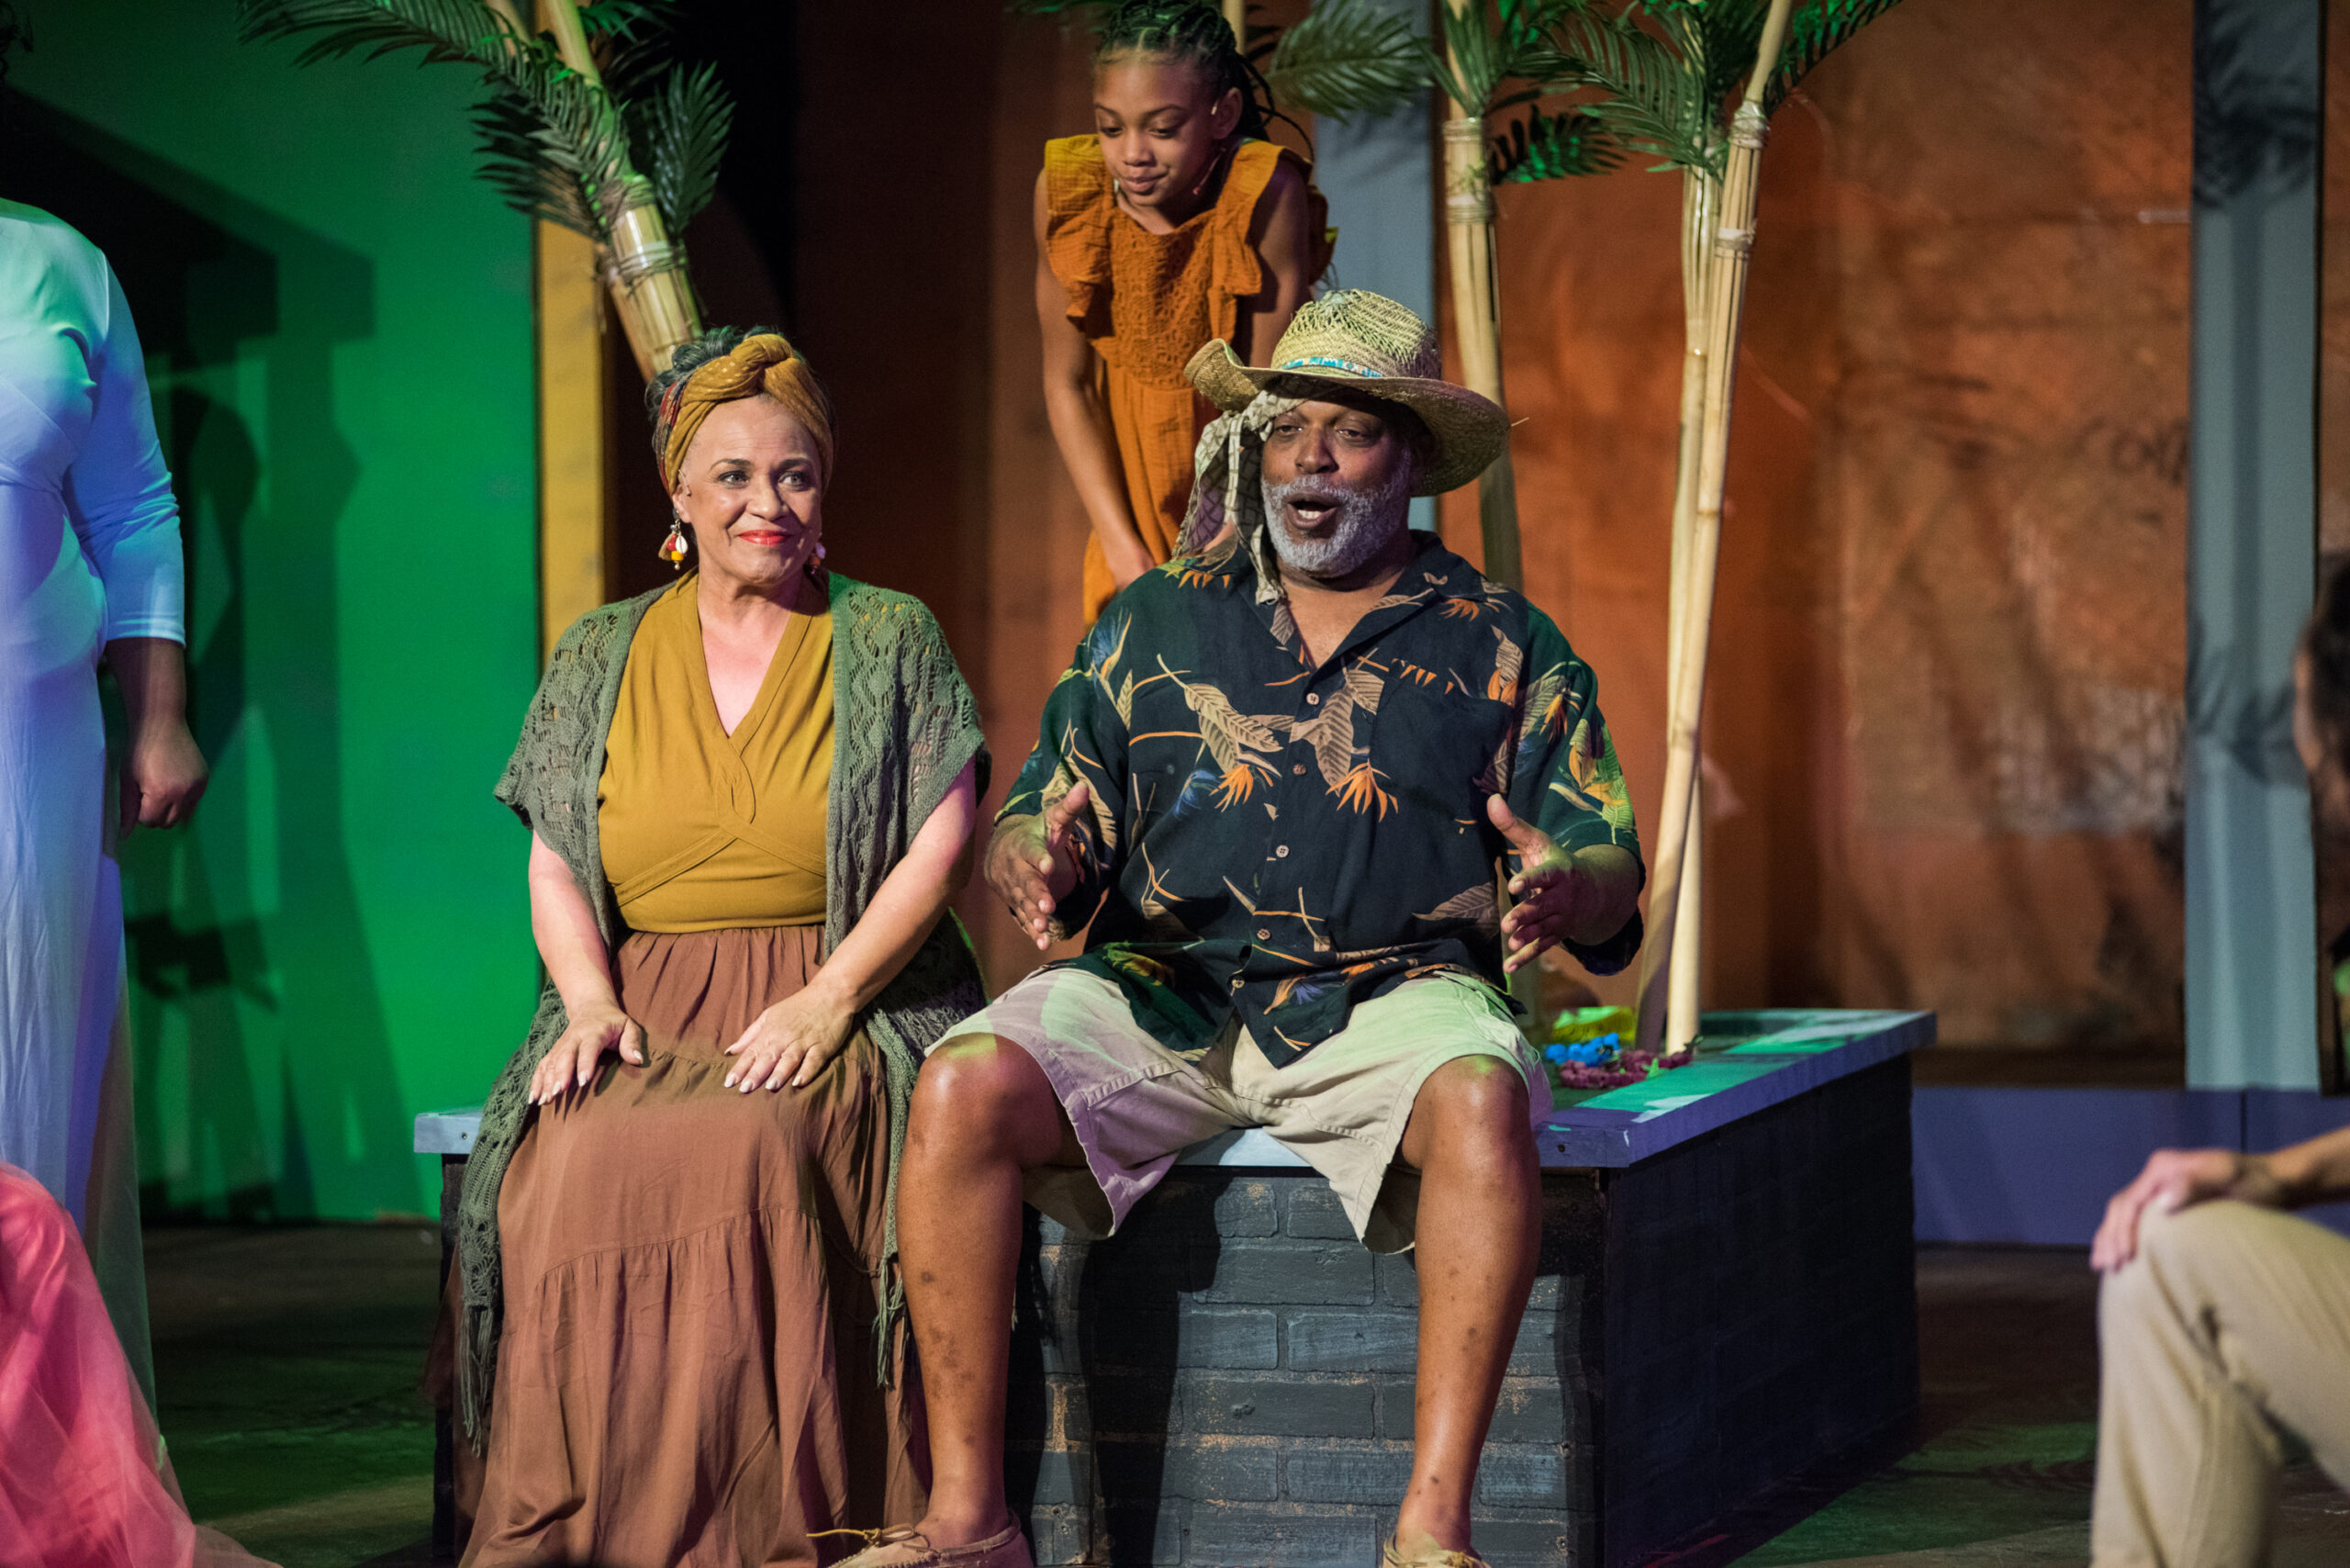 Mama Eulalie (Sheila Kinnard) and Tonton Julian (Robert Barnes) at the conclusion of the story (?: Jerry Fritchman)